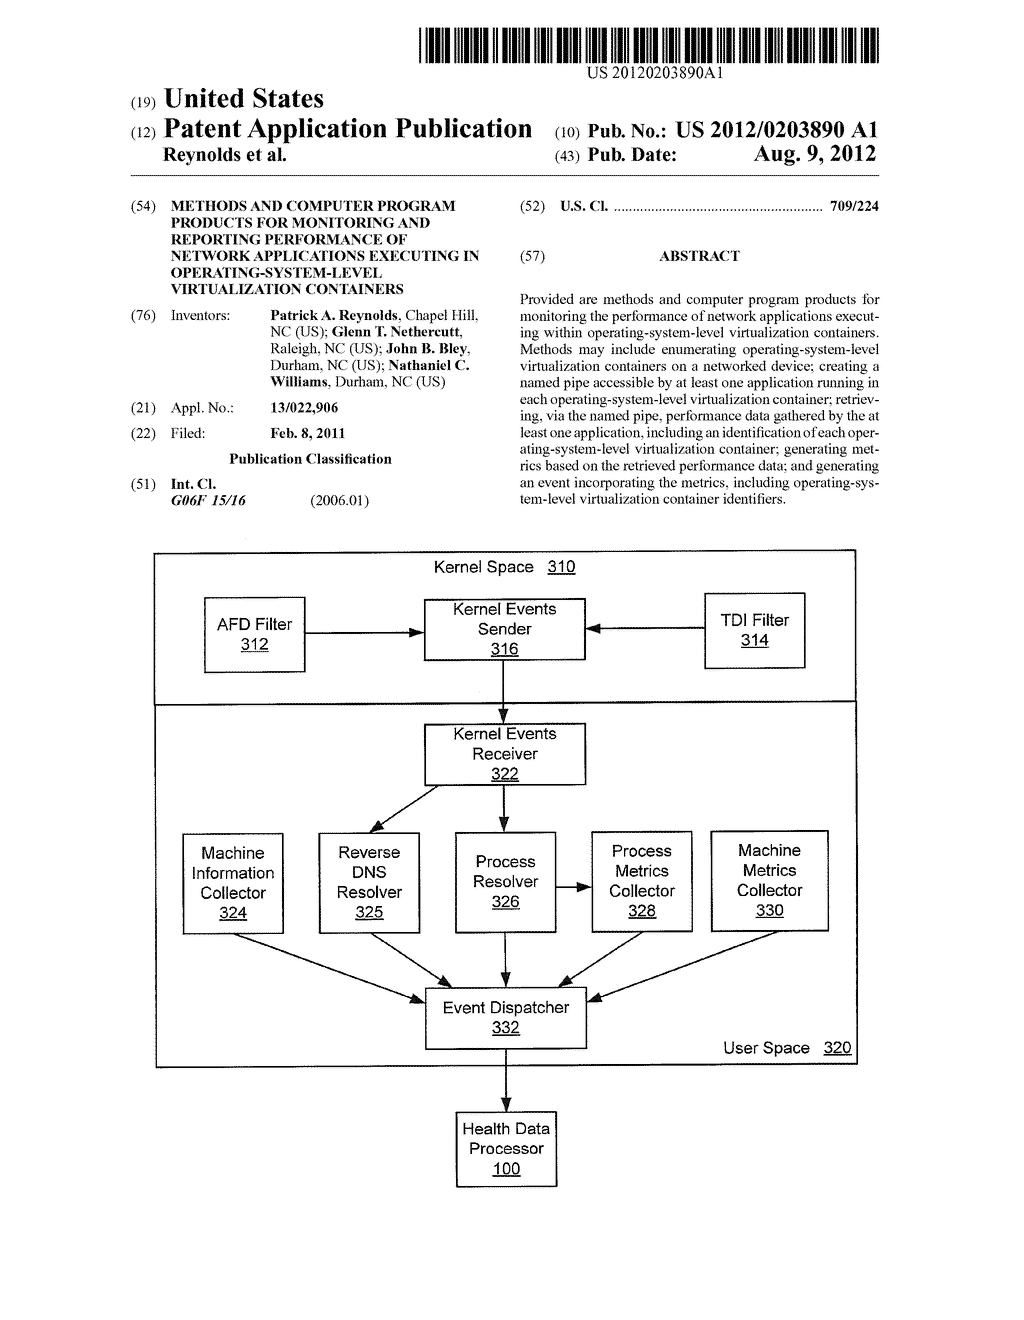 METHODS AND COMPUTER PROGRAM PRODUCTS FOR MONITORING AND REPORTING     PERFORMANCE OF NETWORK APPLICATIONS EXECUTING IN OPERATING-SYSTEM-LEVEL     VIRTUALIZATION CONTAINERS - diagram, schematic, and image 01